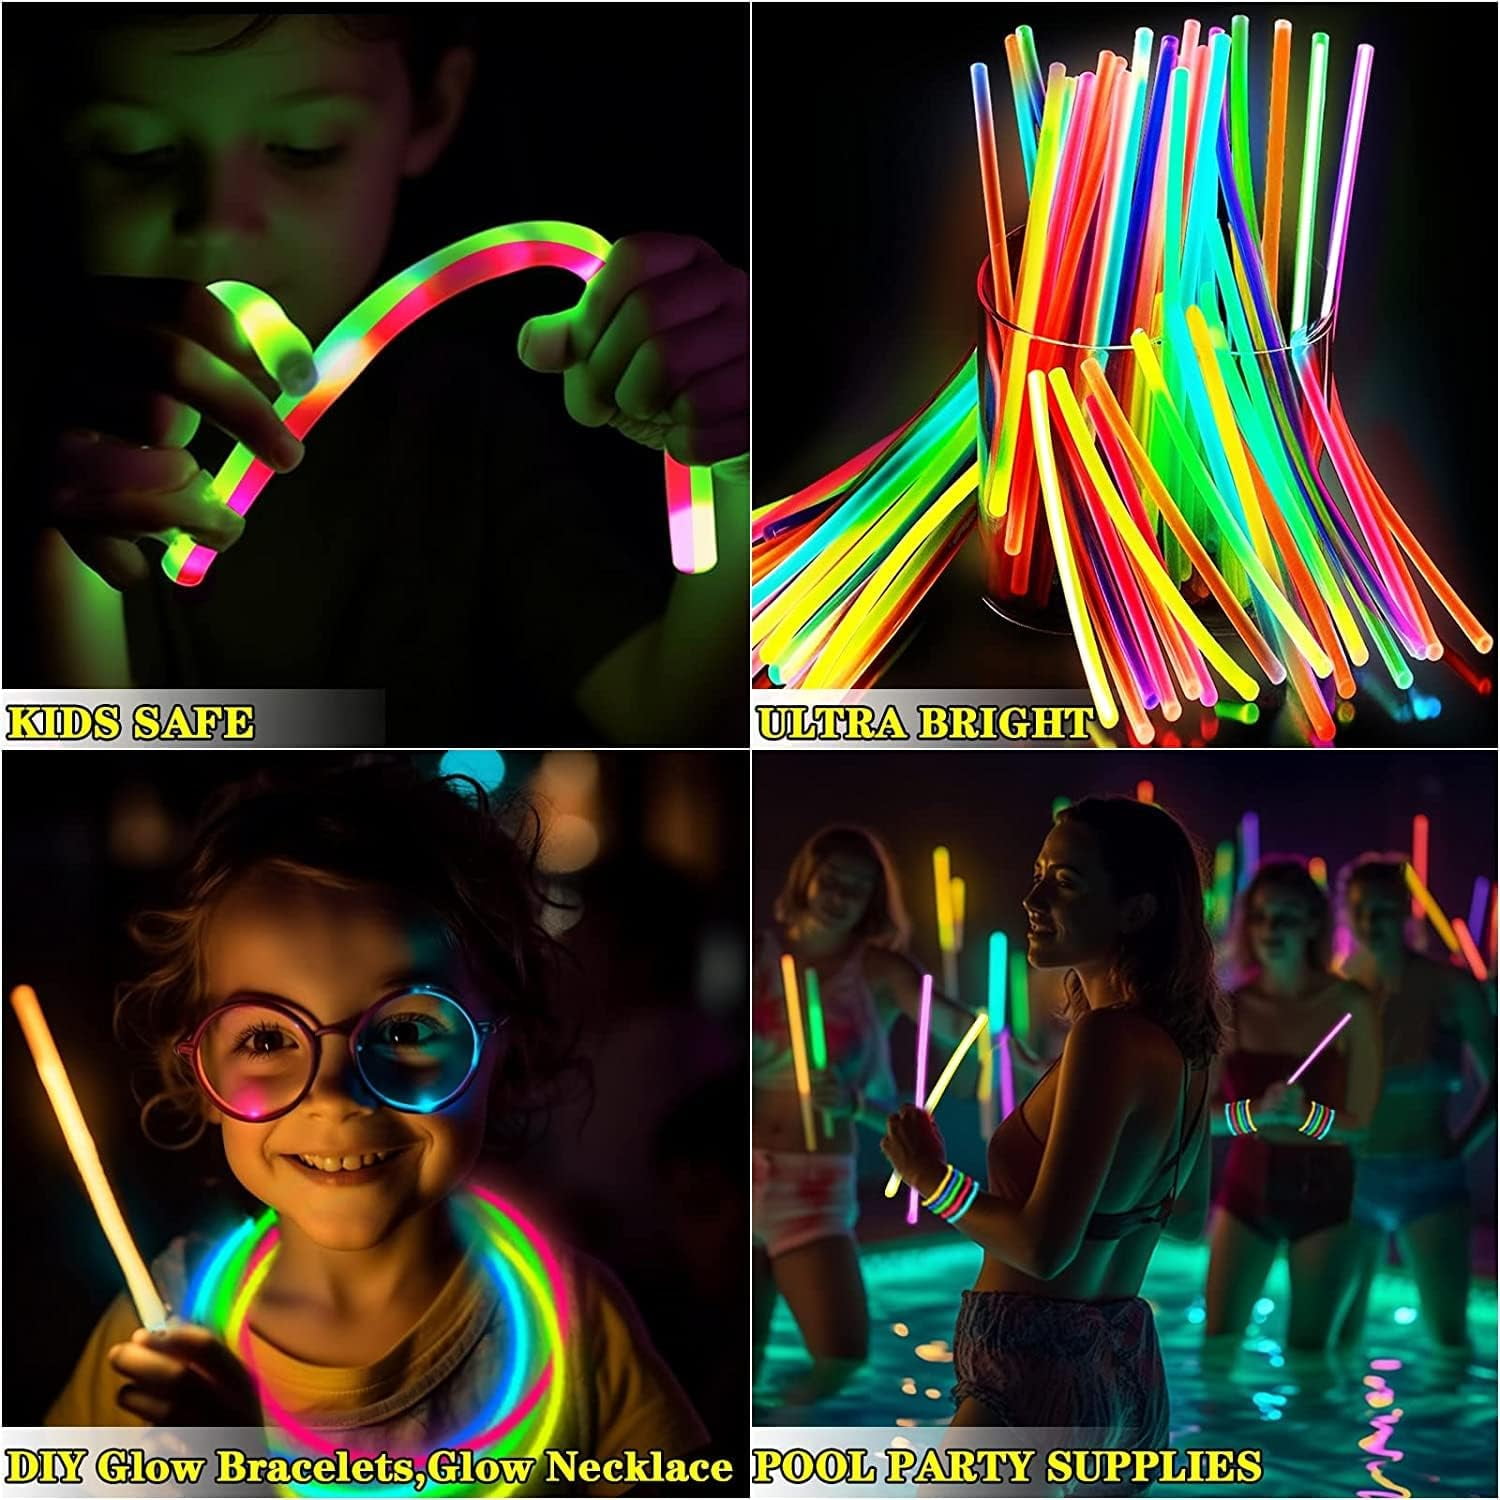 Glow Sticks Bulk Party Favors 100pk - 8 Glow in the Dark Party Supplies,  Light Sticks for Neon Party Glow Necklaces and Bracelets for Kids or Adults  glow sticks bachelorette party decorations